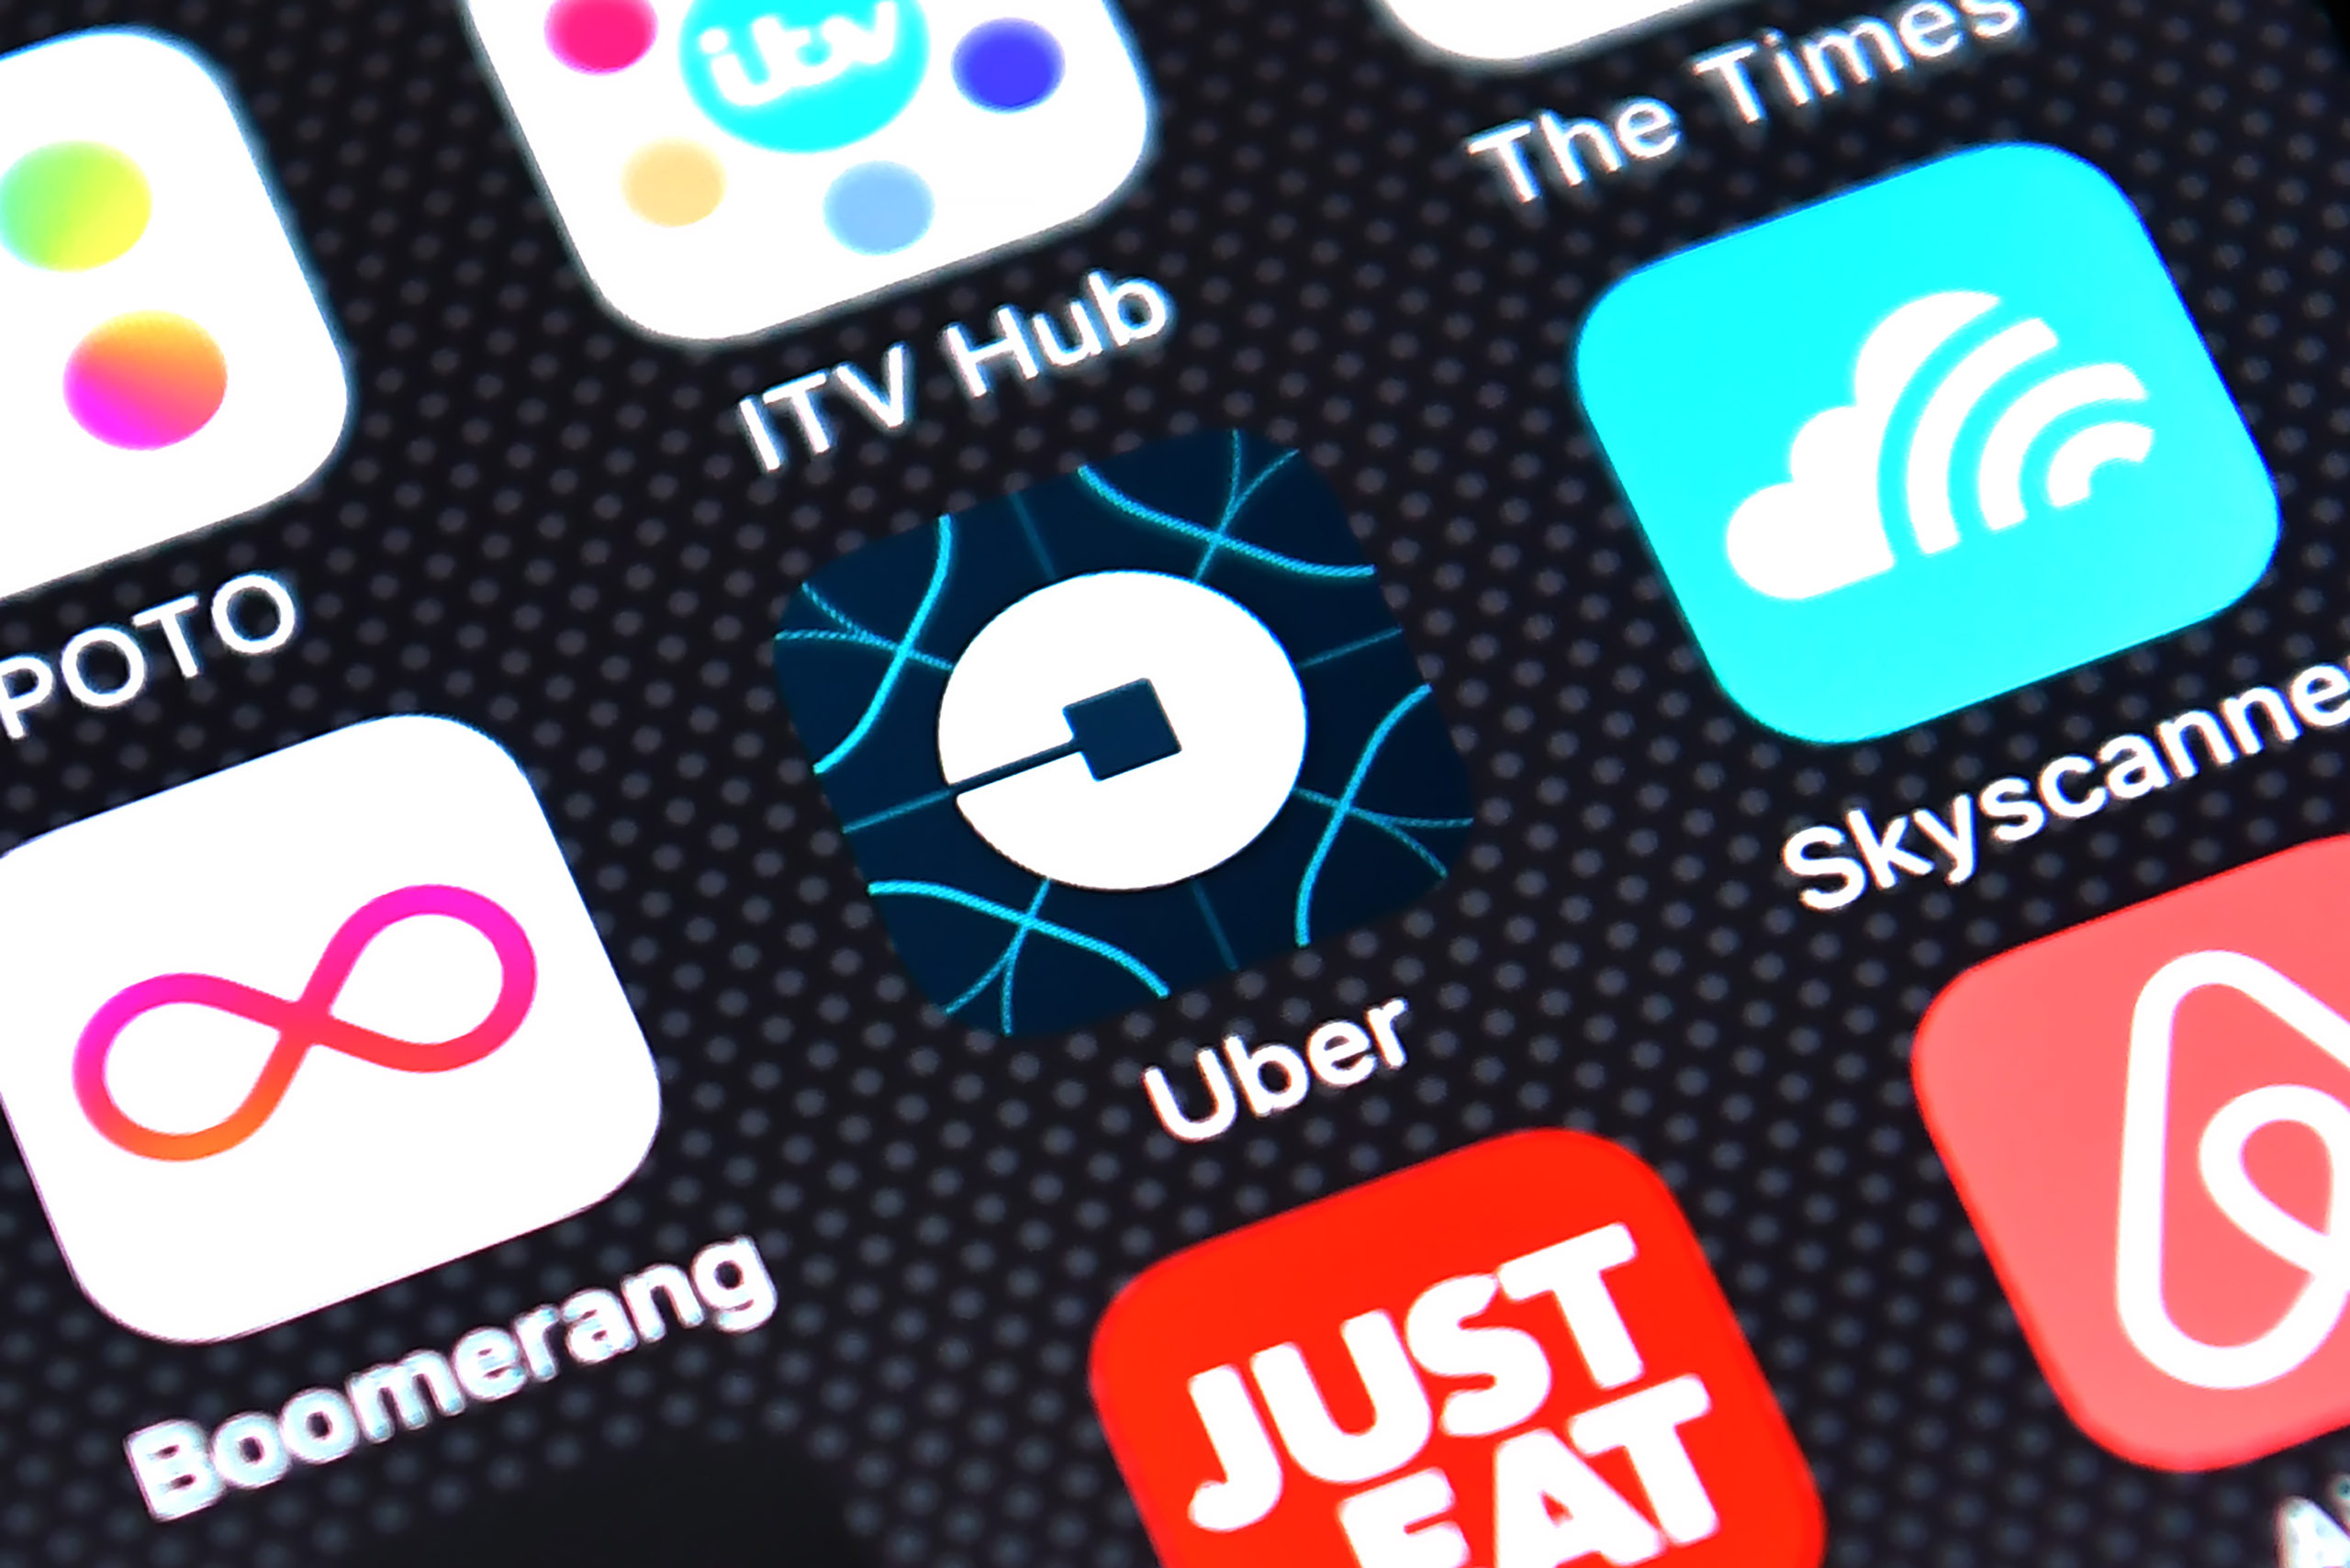 The Uber app logo is displayed on an iPhone on August 3, 2016 in London, England. (Carl Court—Getty Images)